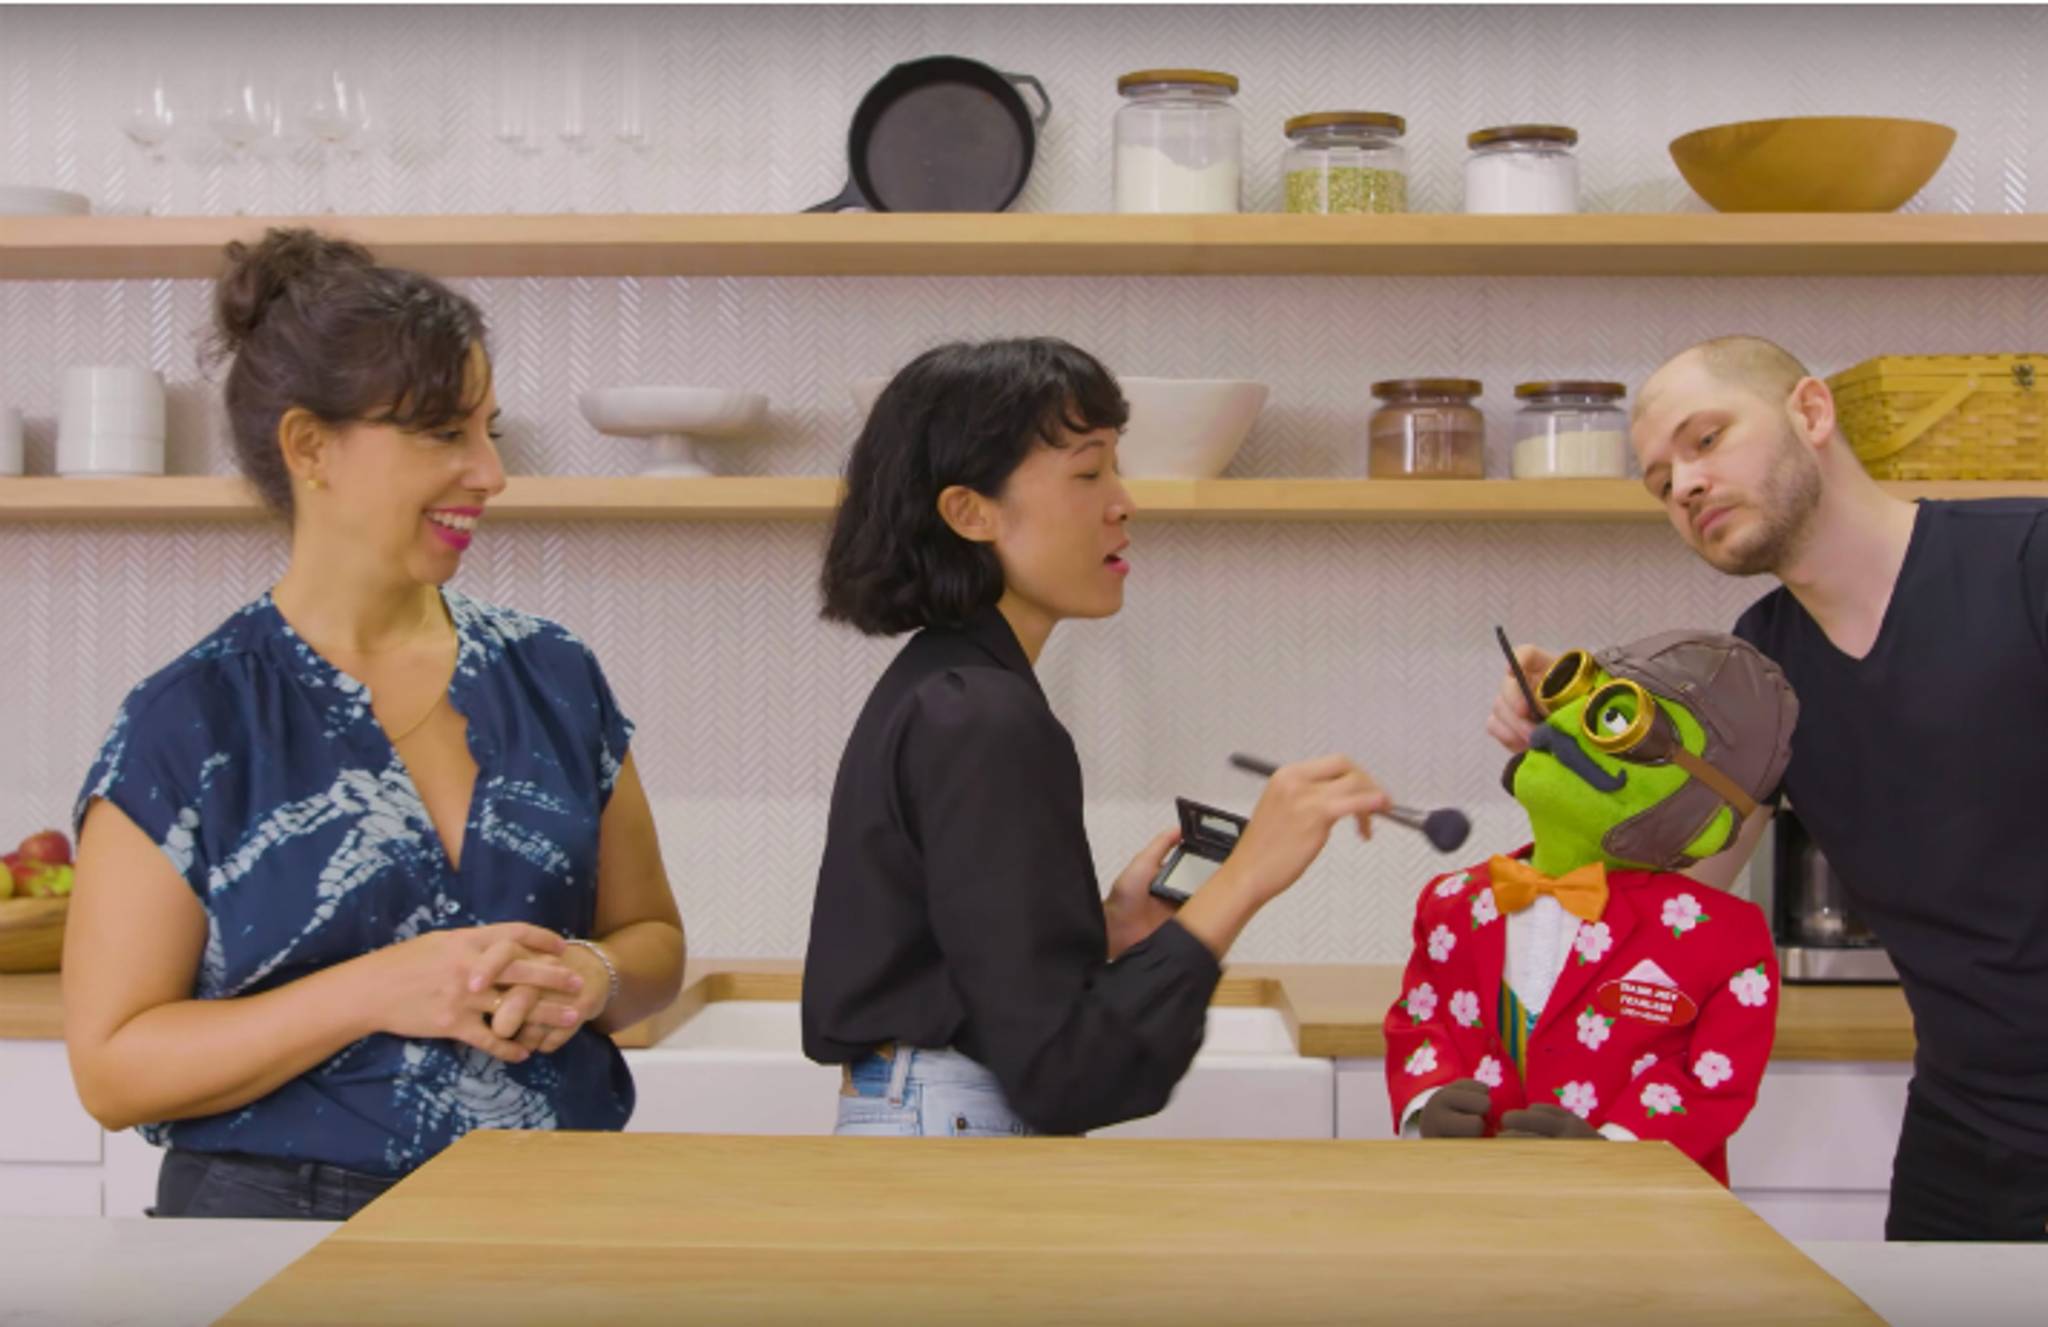 Trader Joe’s lures Gen Z with meme-able YouTube channel